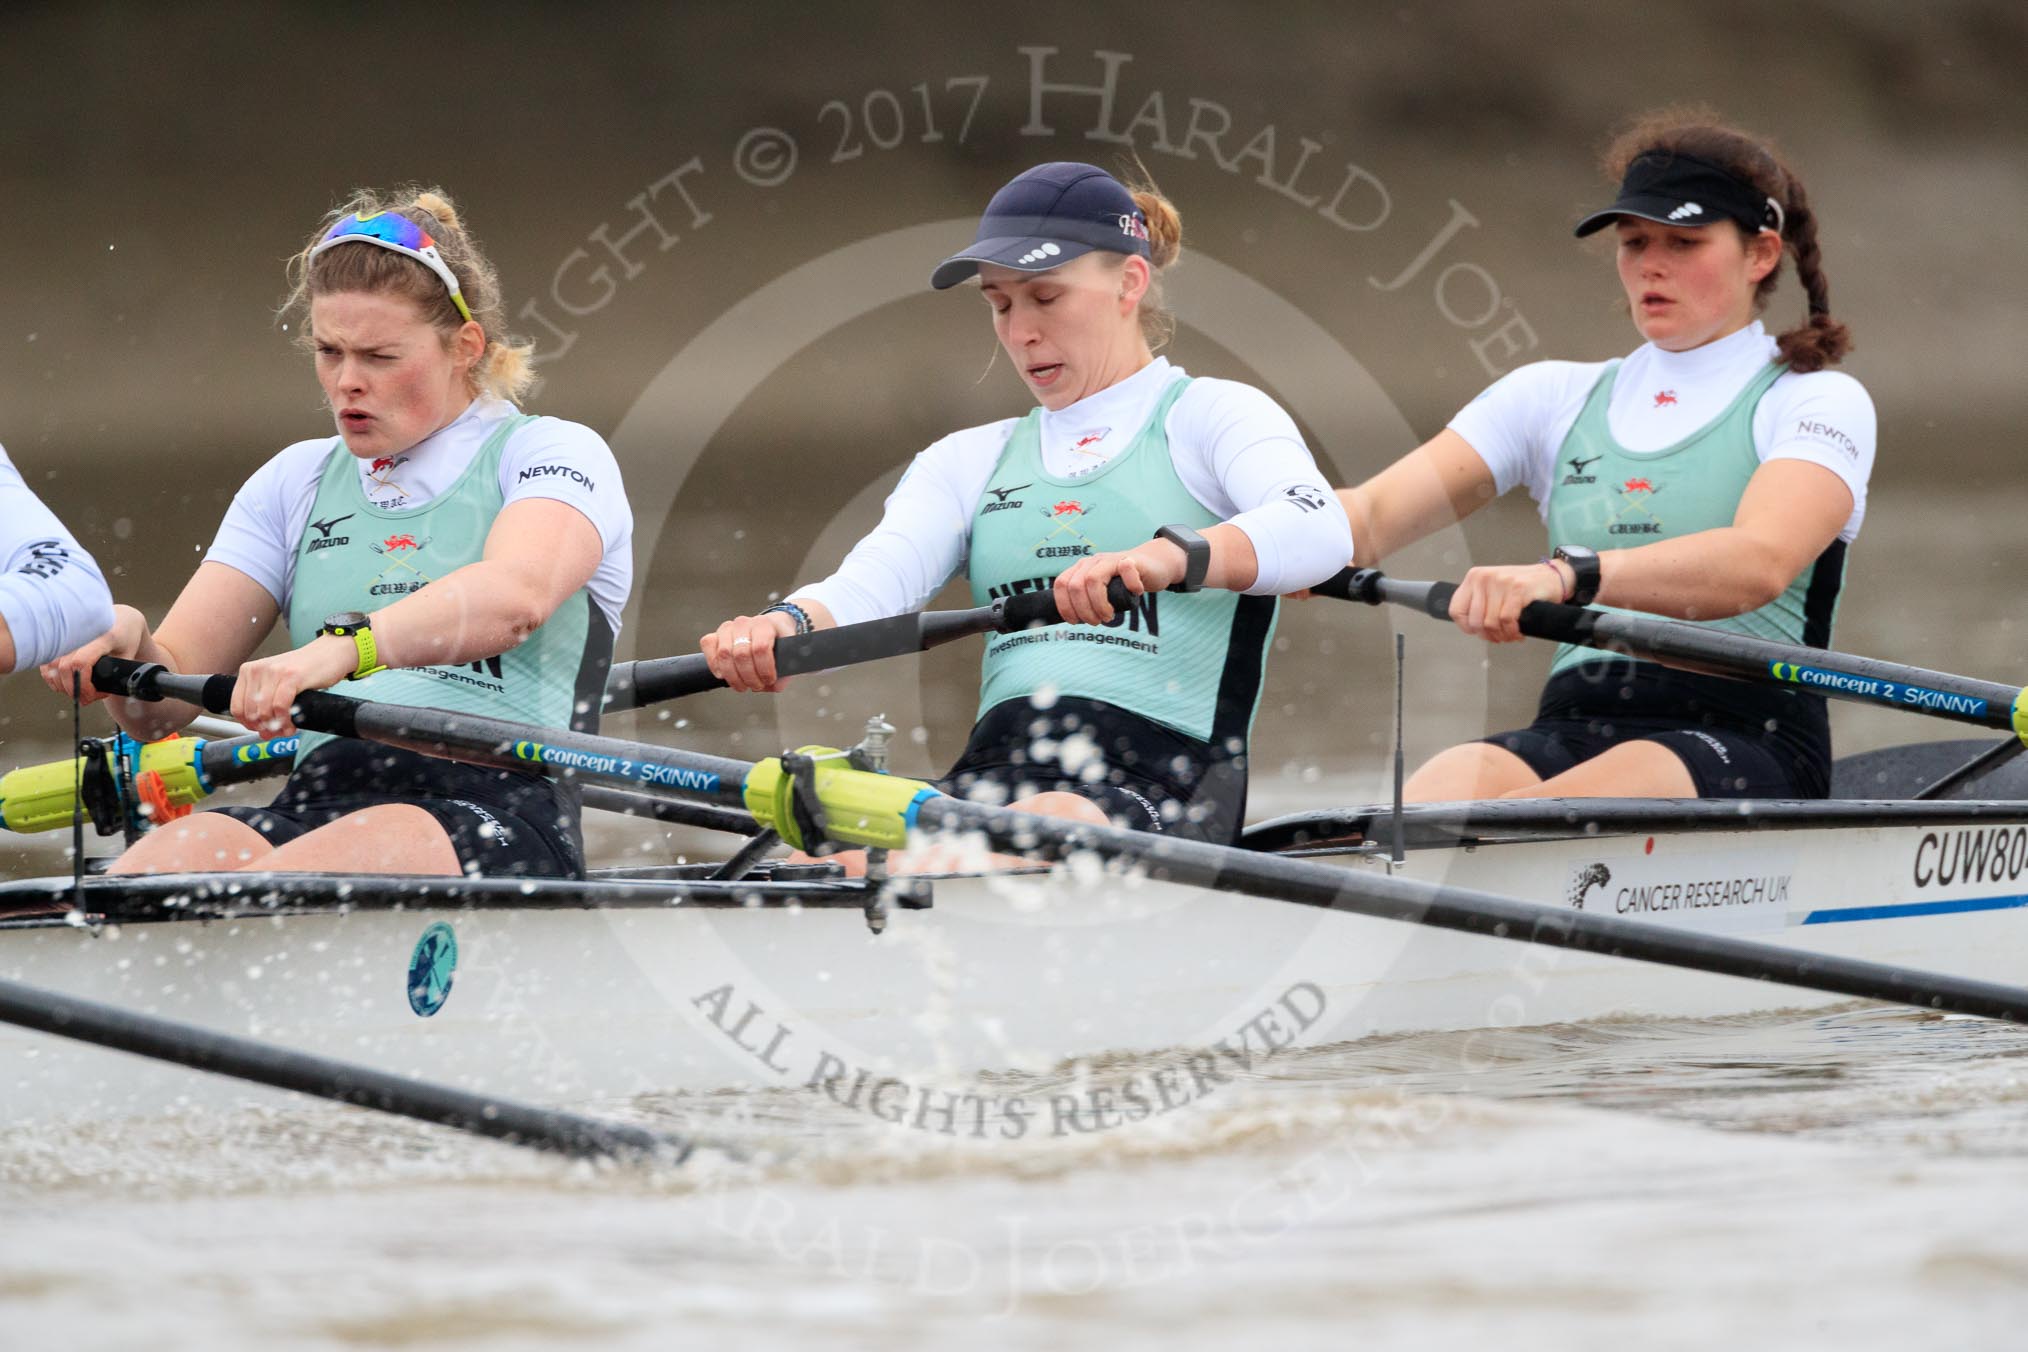 The Boat Race season 2018 - Women's Boat Race Trial Eights (CUWBC, Cambridge): Expecto Patronum, here 3 Sally O Brien, 2 Millie Perrin, bow Eve Caroe.
River Thames between Putney Bridge and Mortlake,
London SW15,

United Kingdom,
on 05 December 2017 at 12:47, image #89